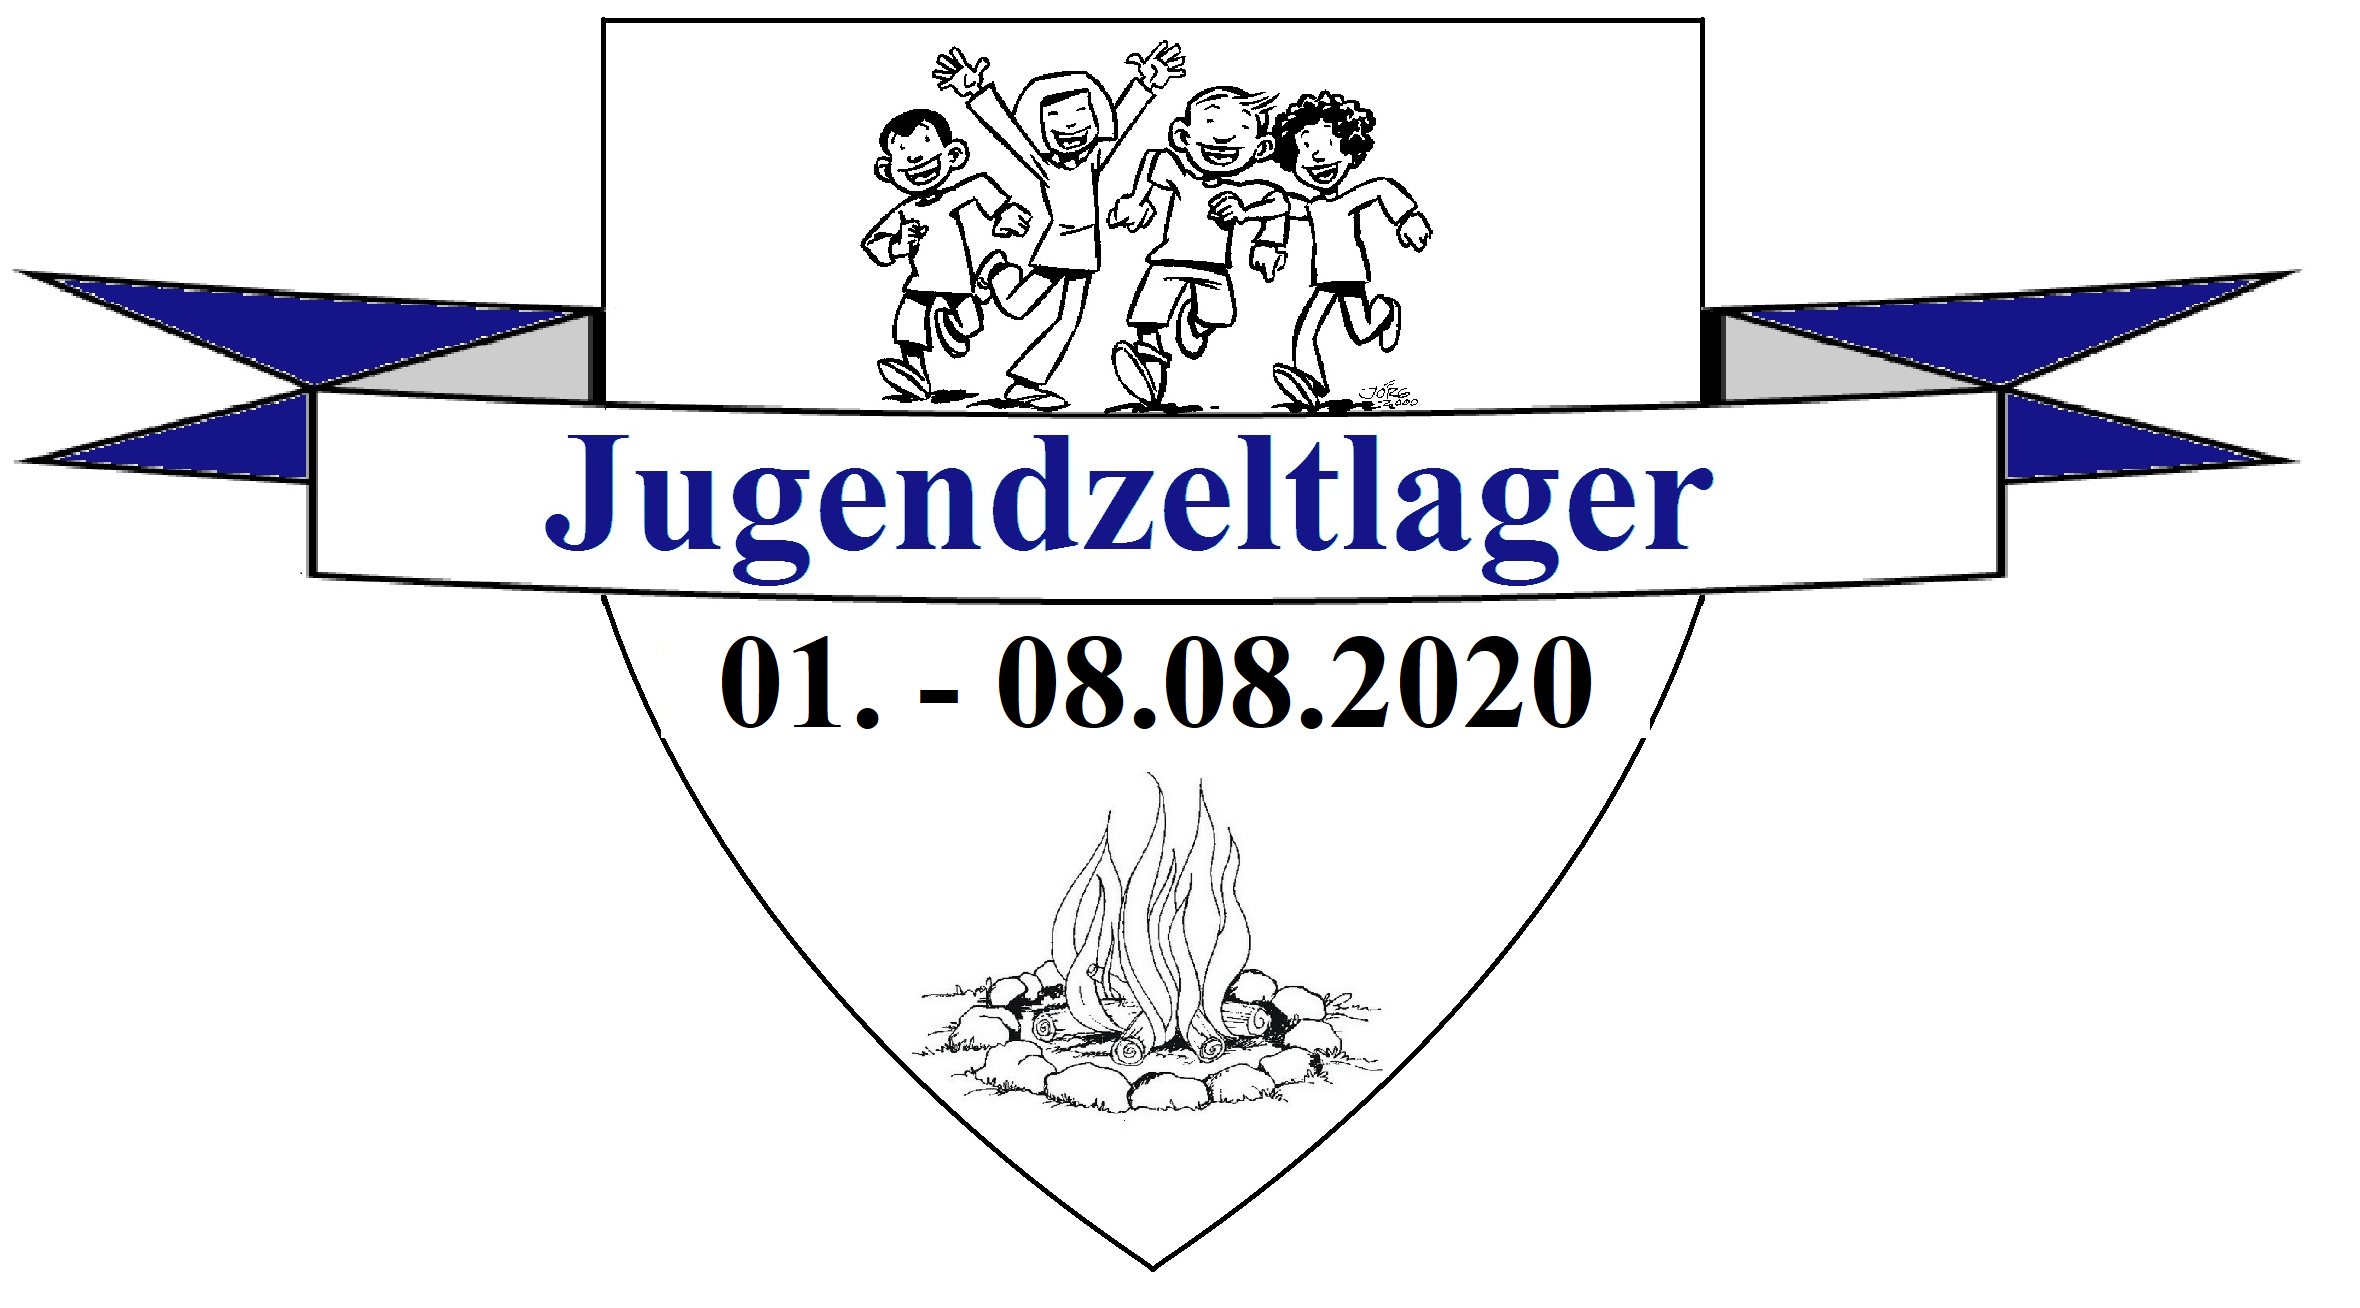 You are currently viewing Jugendzeltlager 2020 – hier sind die Infos